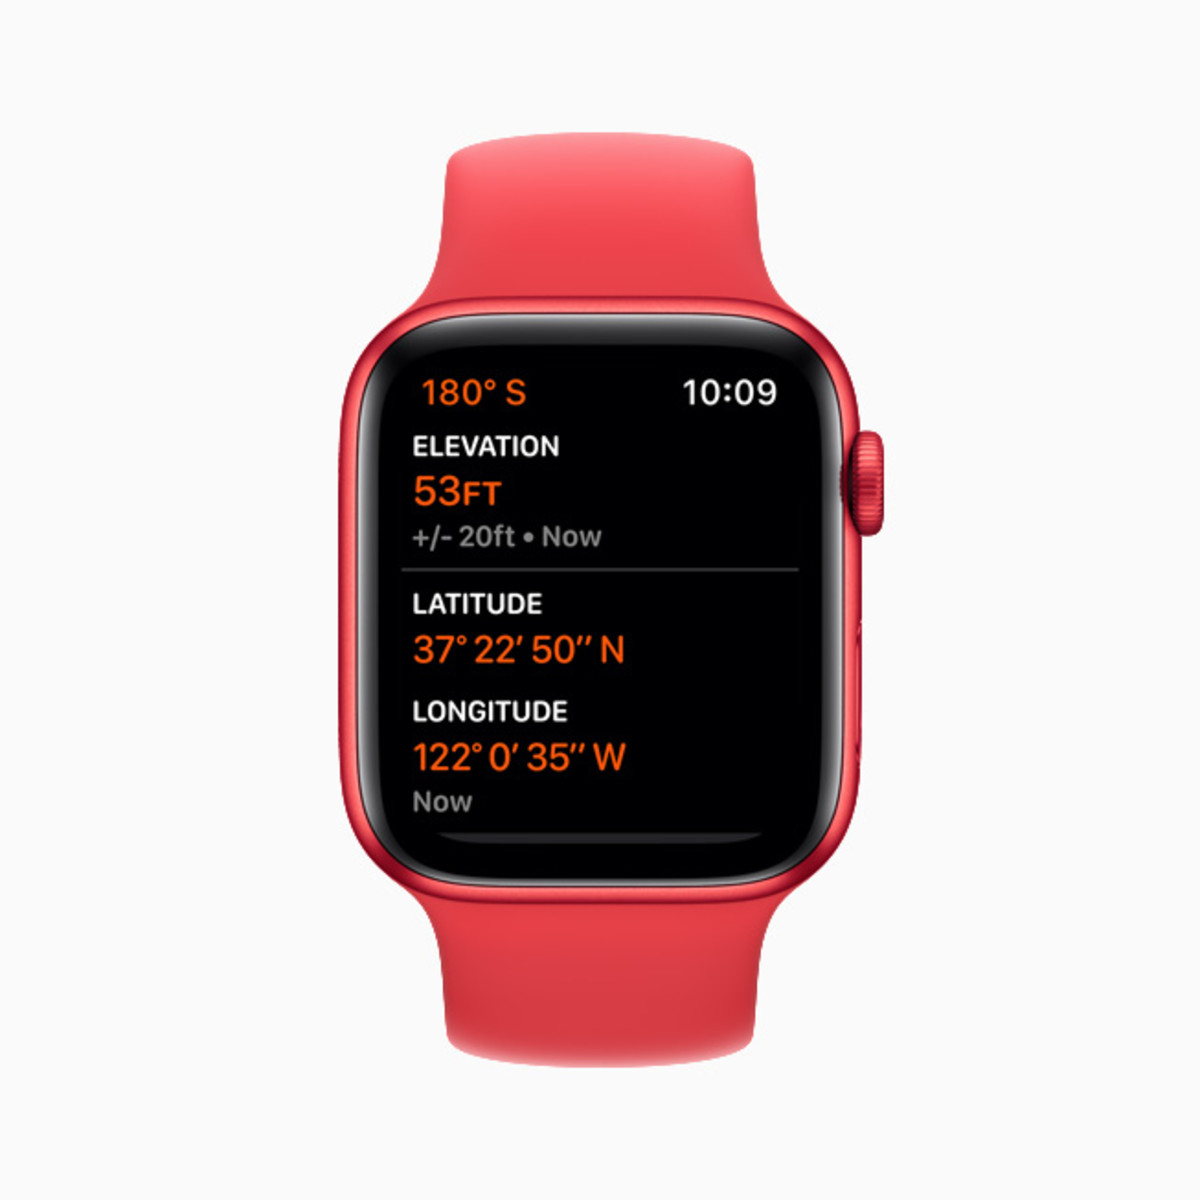 The Always-On Altimeter On Apple Watch Series 6 Provides Real-Time Elevation All Day Long.